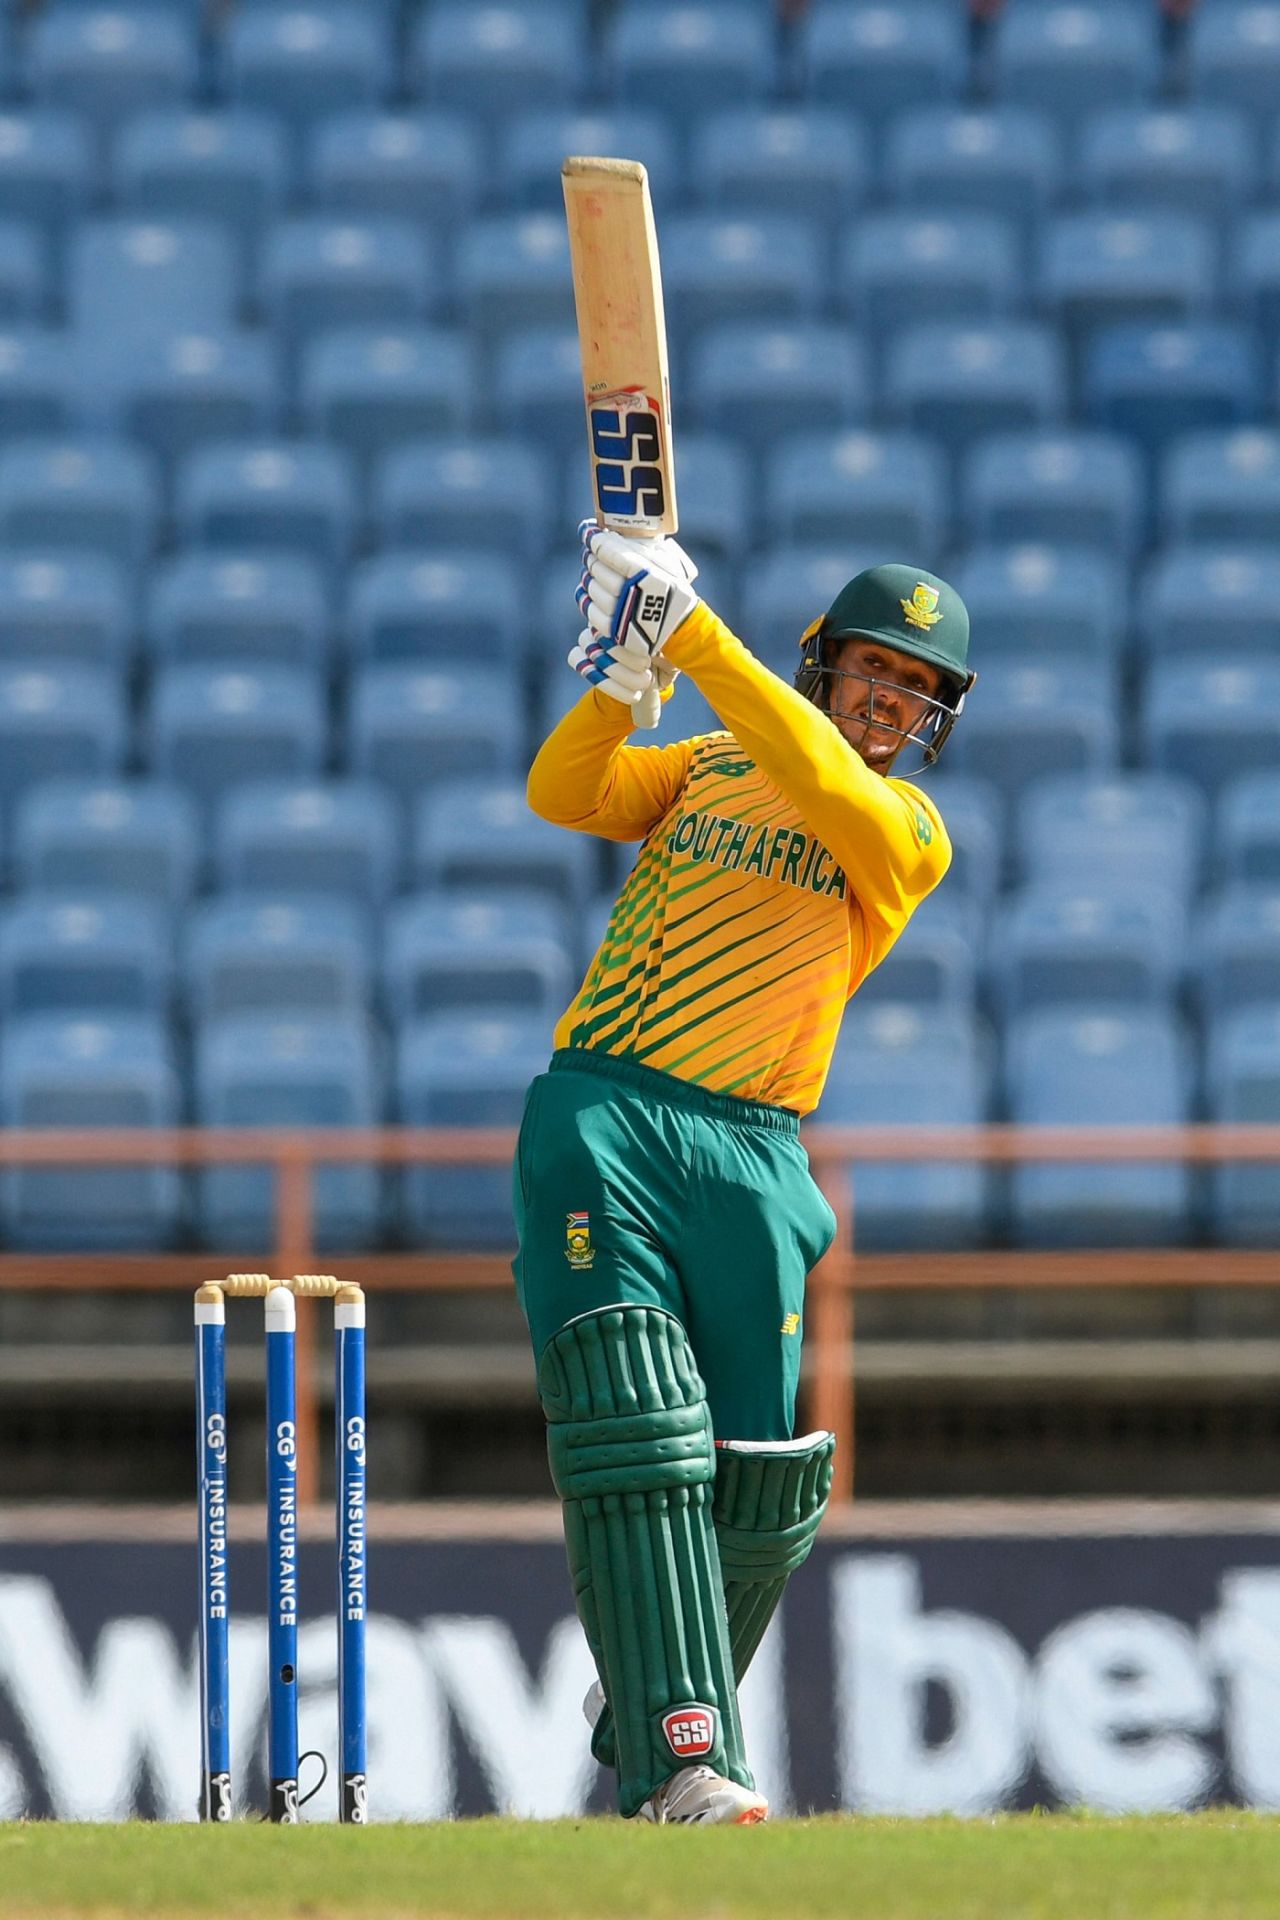 Quinton de Kock drives to the on side, West Indies vs South Africa, 4th T20I, St George's, July 1, 2021